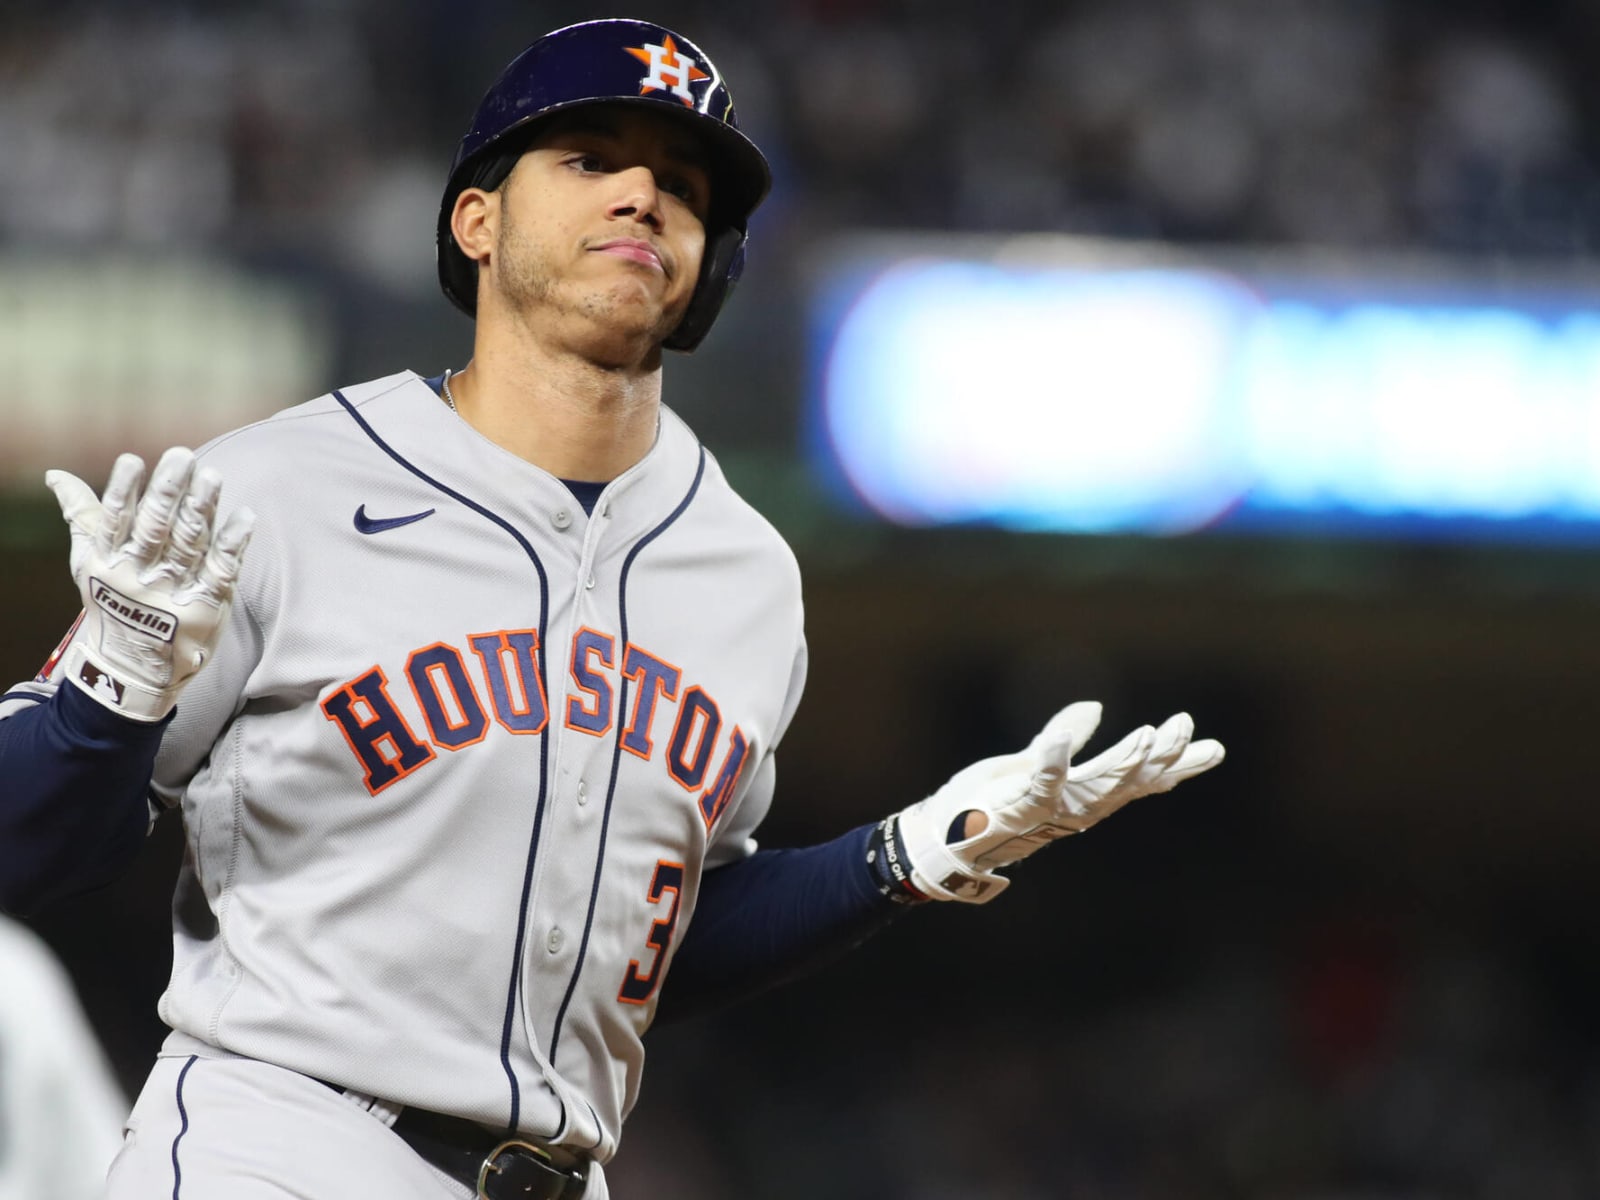 Astros rookie shortstop Jeremy Peña named ALCS MVP after hitting